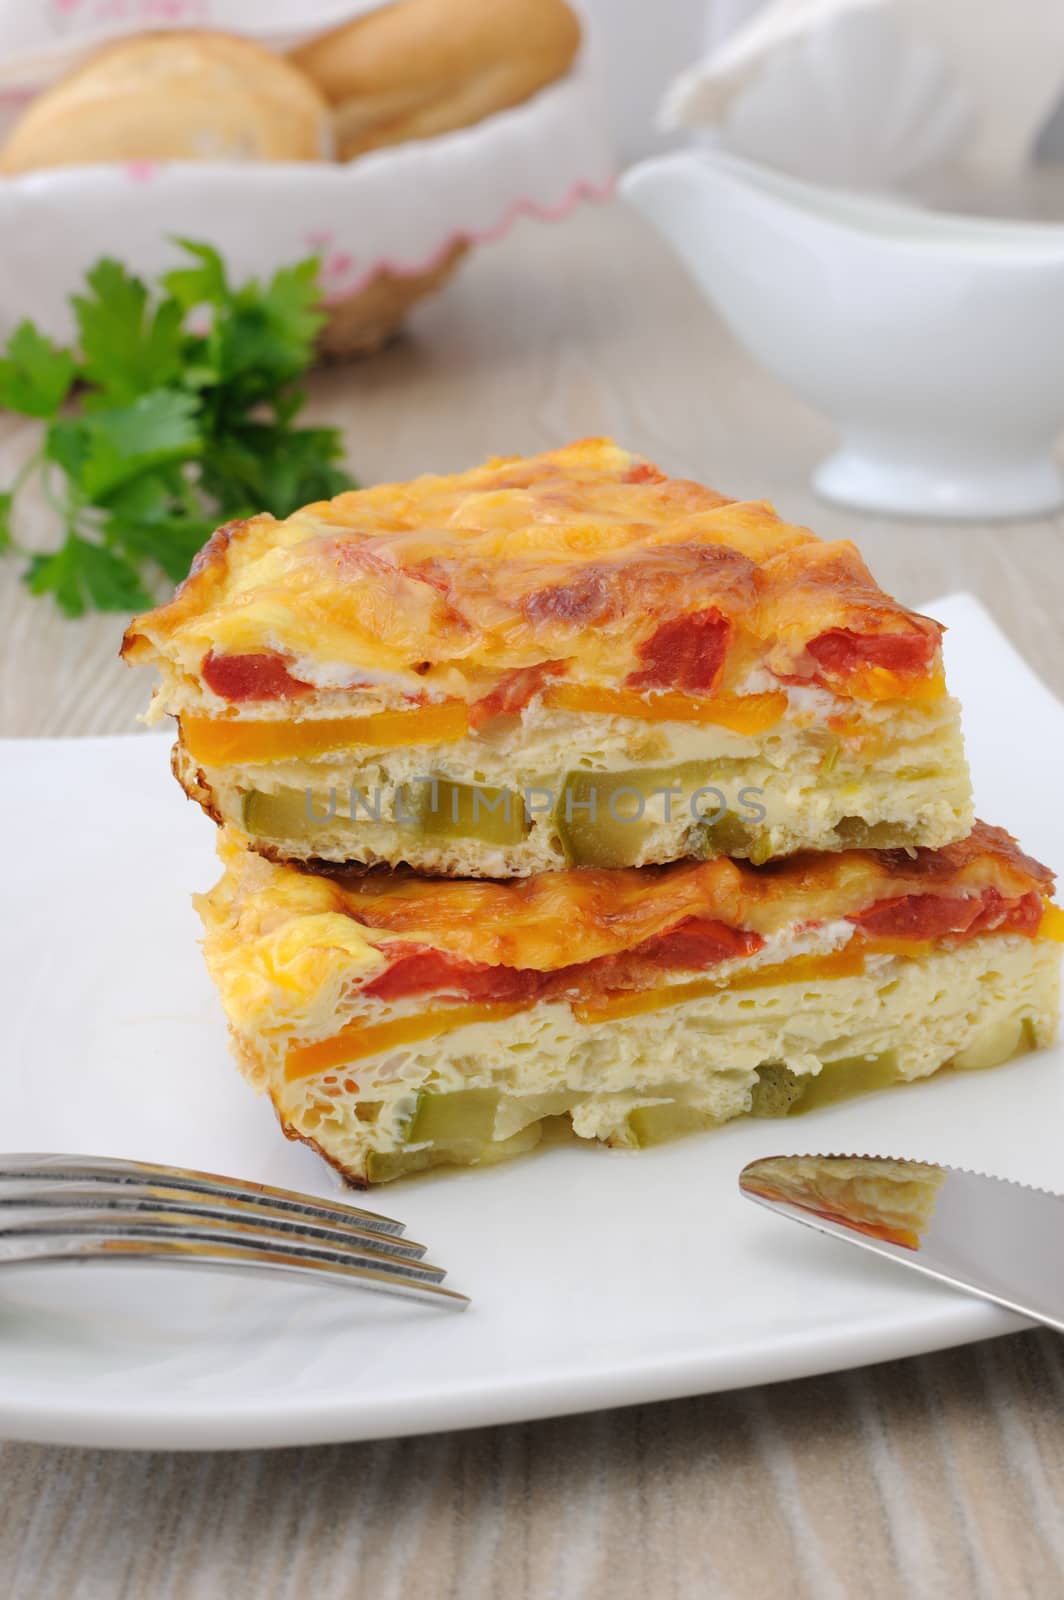 omelette slices of zucchini, carrot, tomato, with cheese